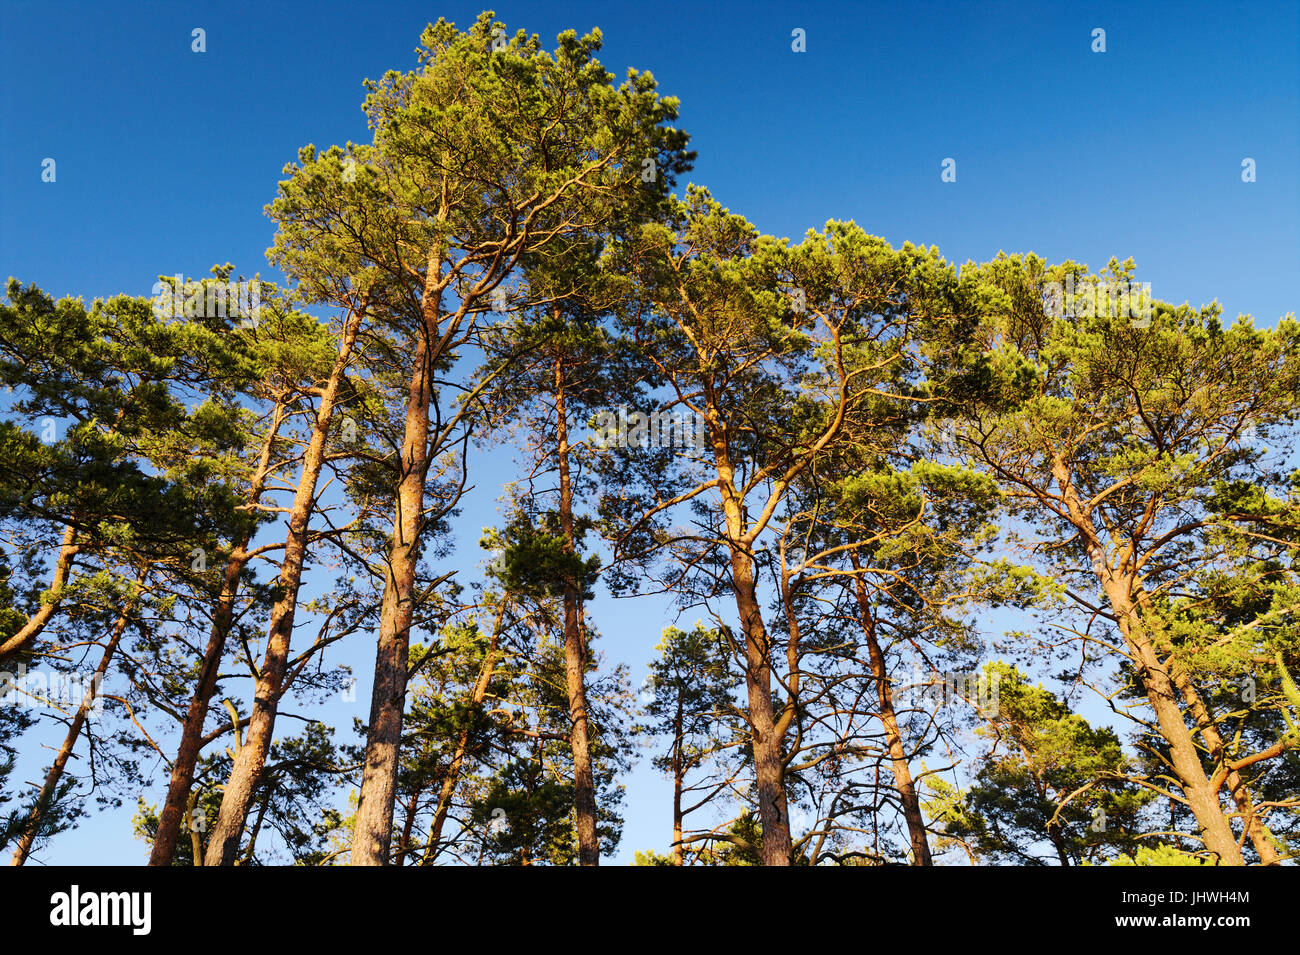 Crowns of Scots or Scotch pine Pinus sylvestris trees against blue sky. Group of tall pine trees growing in evergreen coniferous wood. Poland. Stock Photo